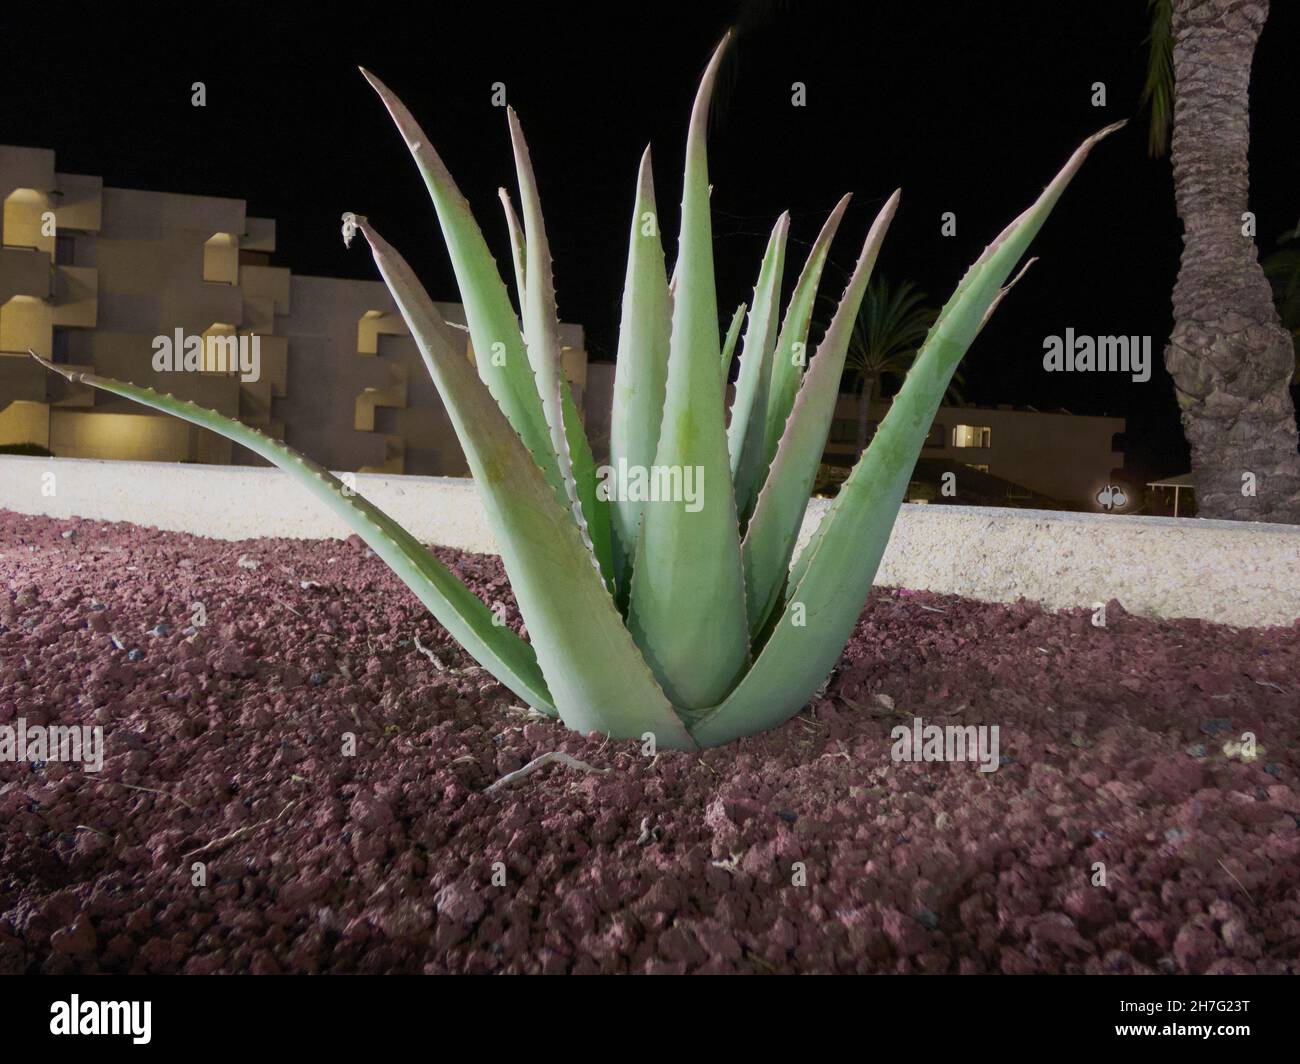 Closeup shot of an aloe vera plant on red soil with buildings and the night sky in the background Stock Photo